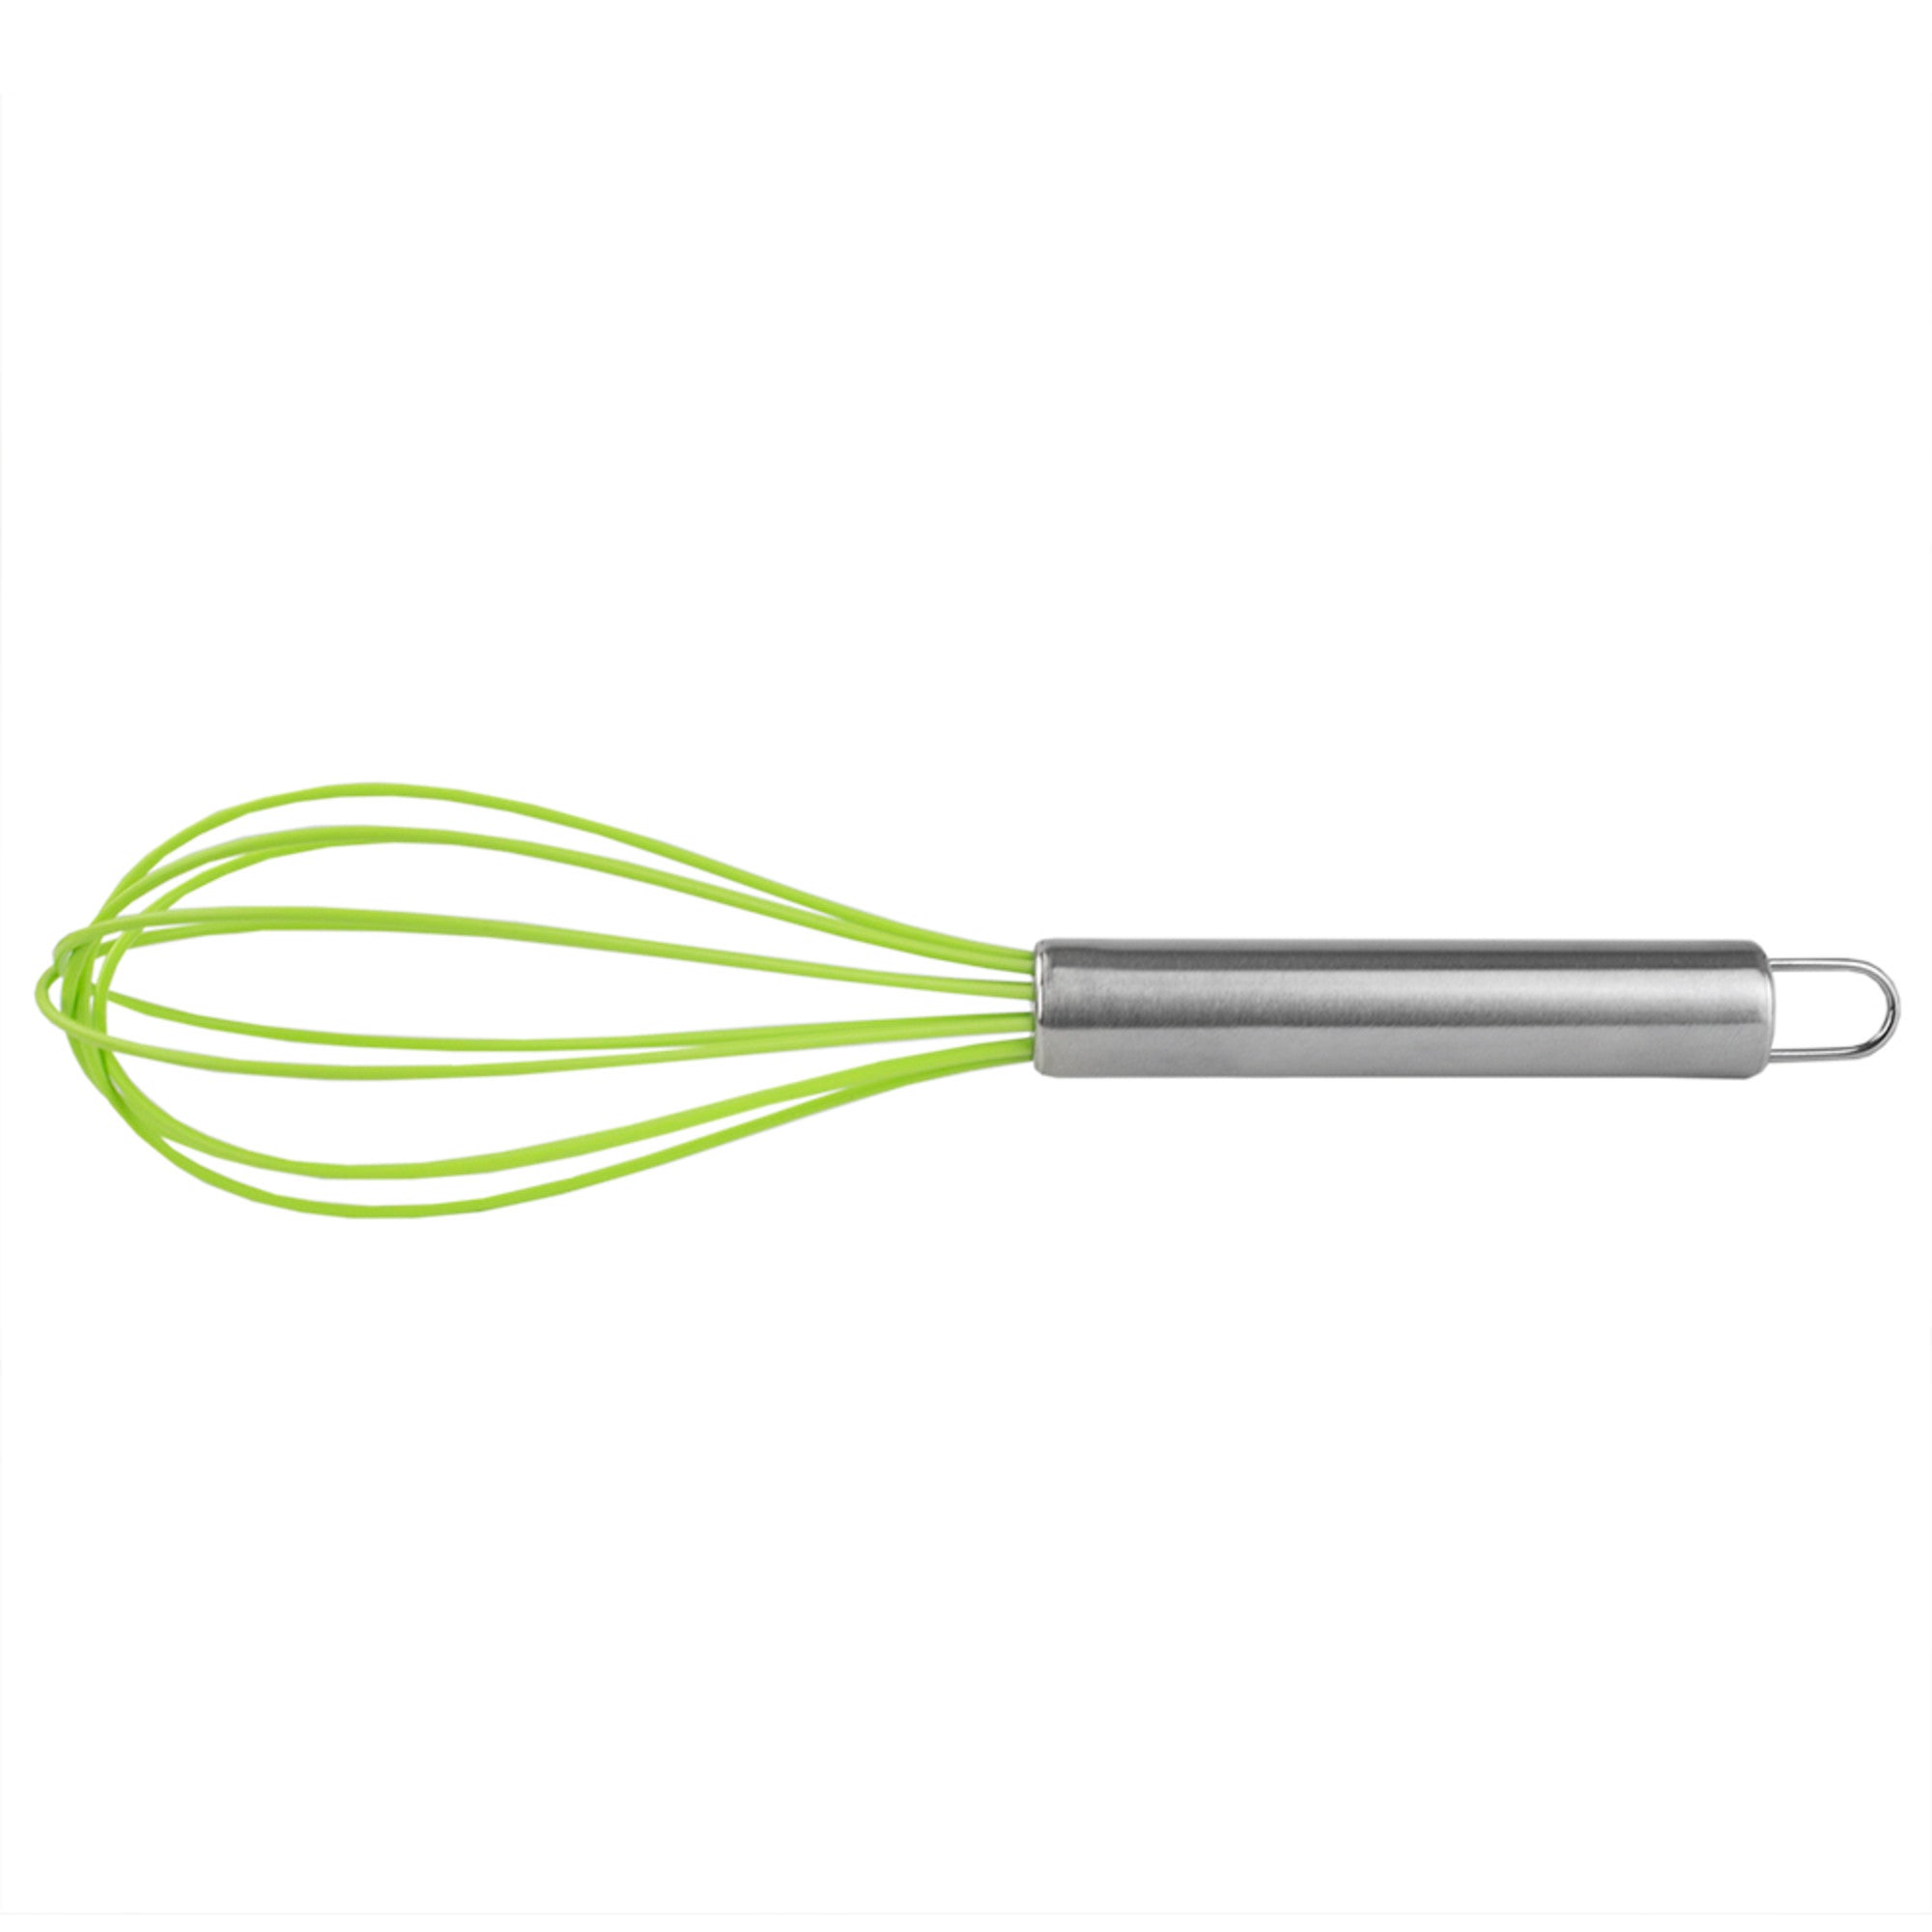 StarPack Basics Silicone Whisks for Cooking - Whisk Silicone Material with  High Heat Resistance of 480°F - Non-Stick Kitchen Whisk for Cooking, Baking